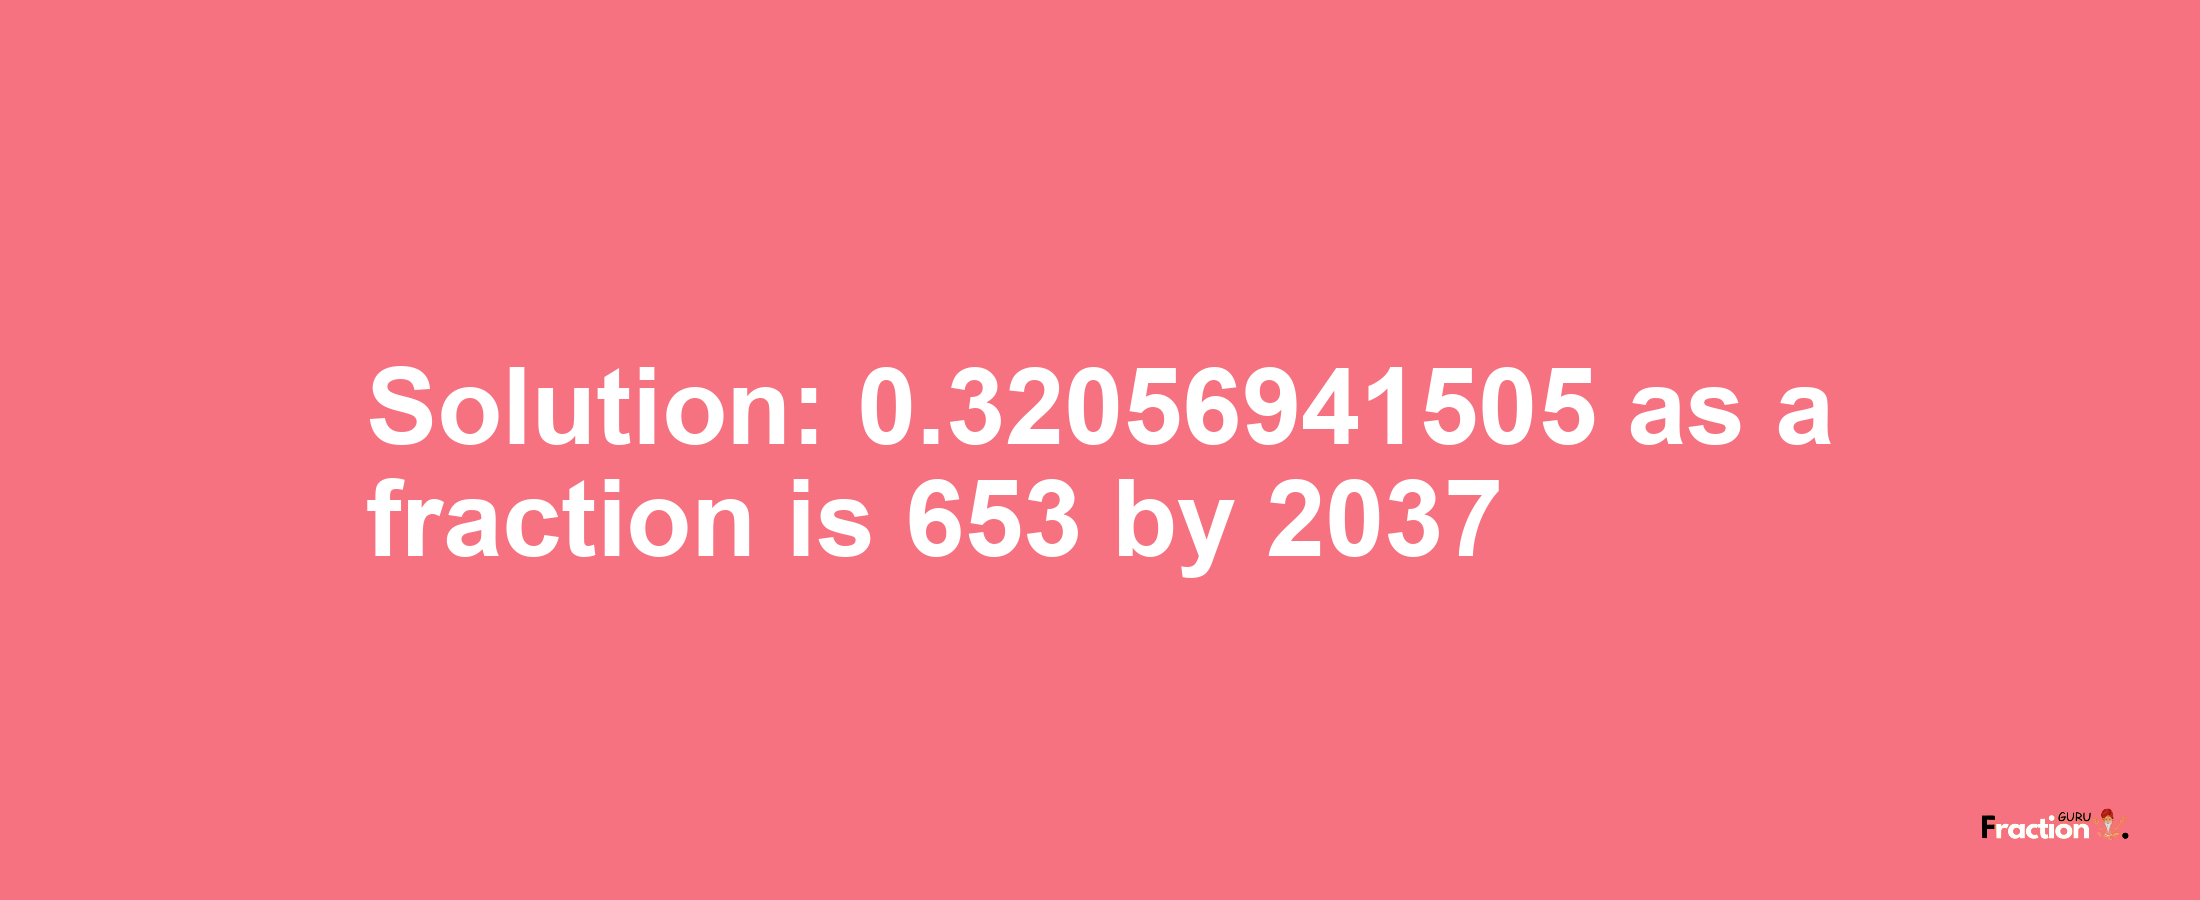 Solution:0.32056941505 as a fraction is 653/2037